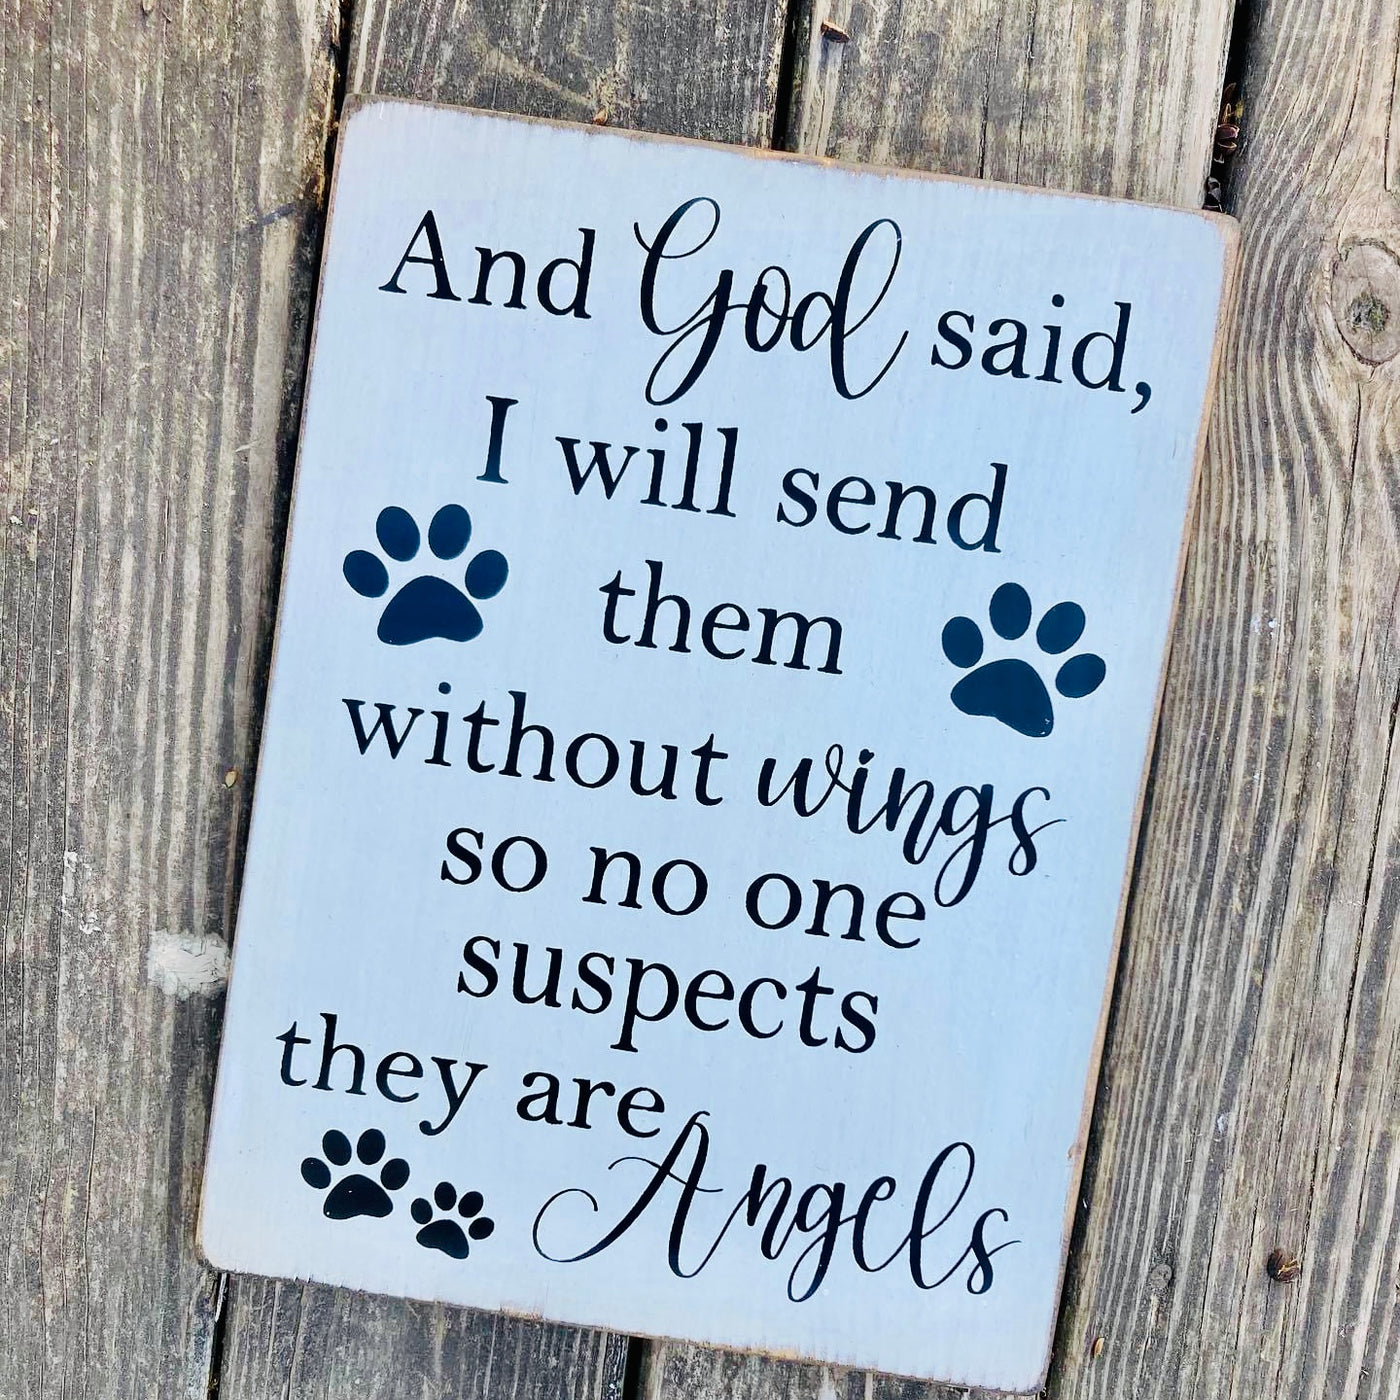 Handmade wood sign reads And God said, I will send them without wings so no one suspects they are Angels. White sign with black lettering and paw print accents.